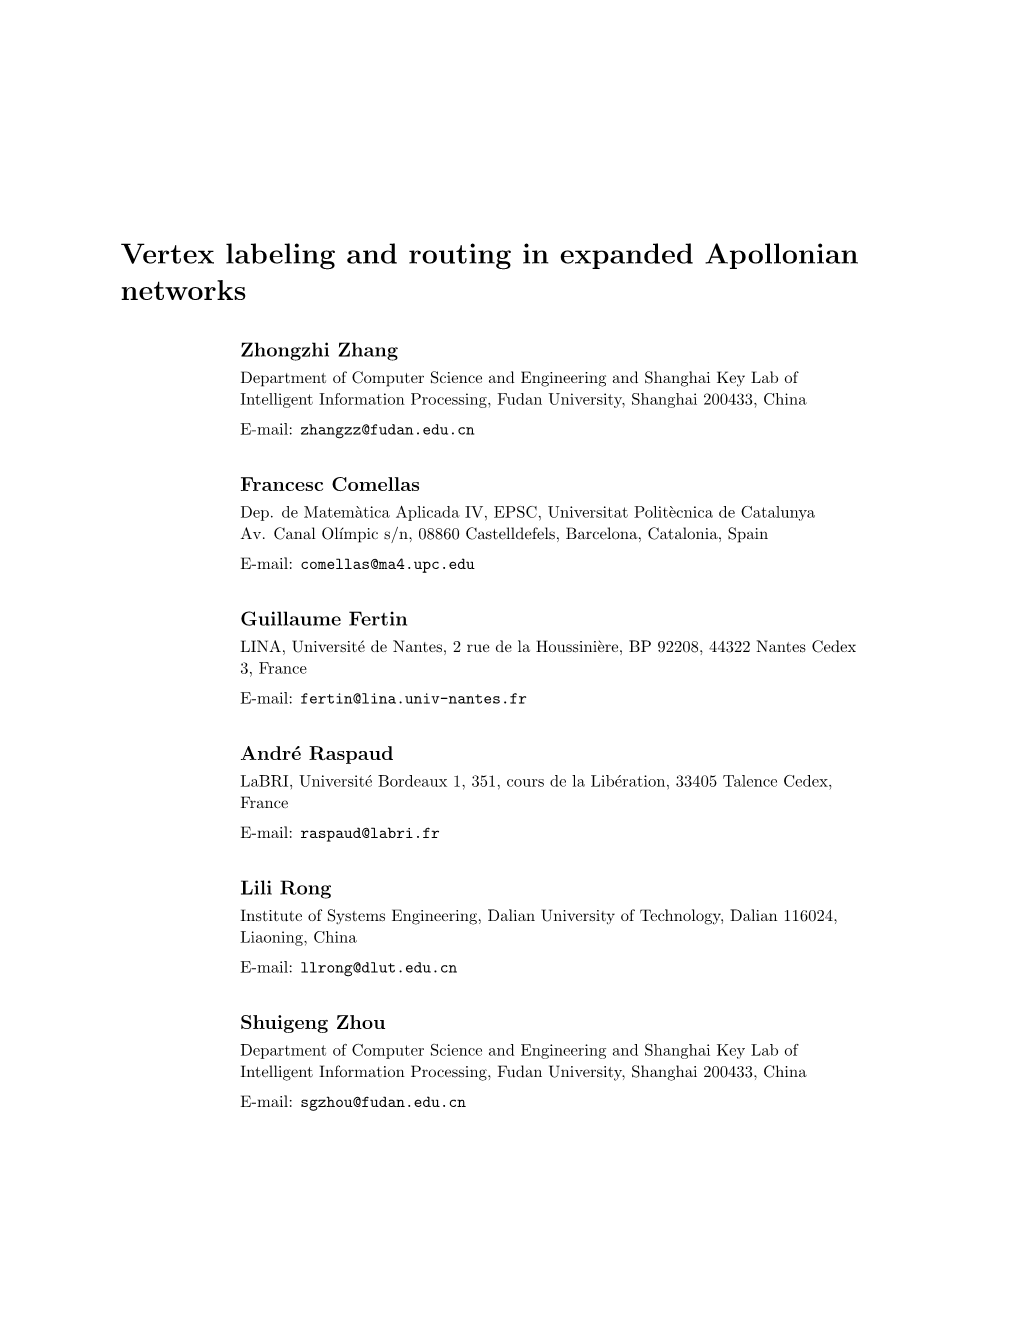 Vertex Labeling and Routing in Expanded Apollonian Networks